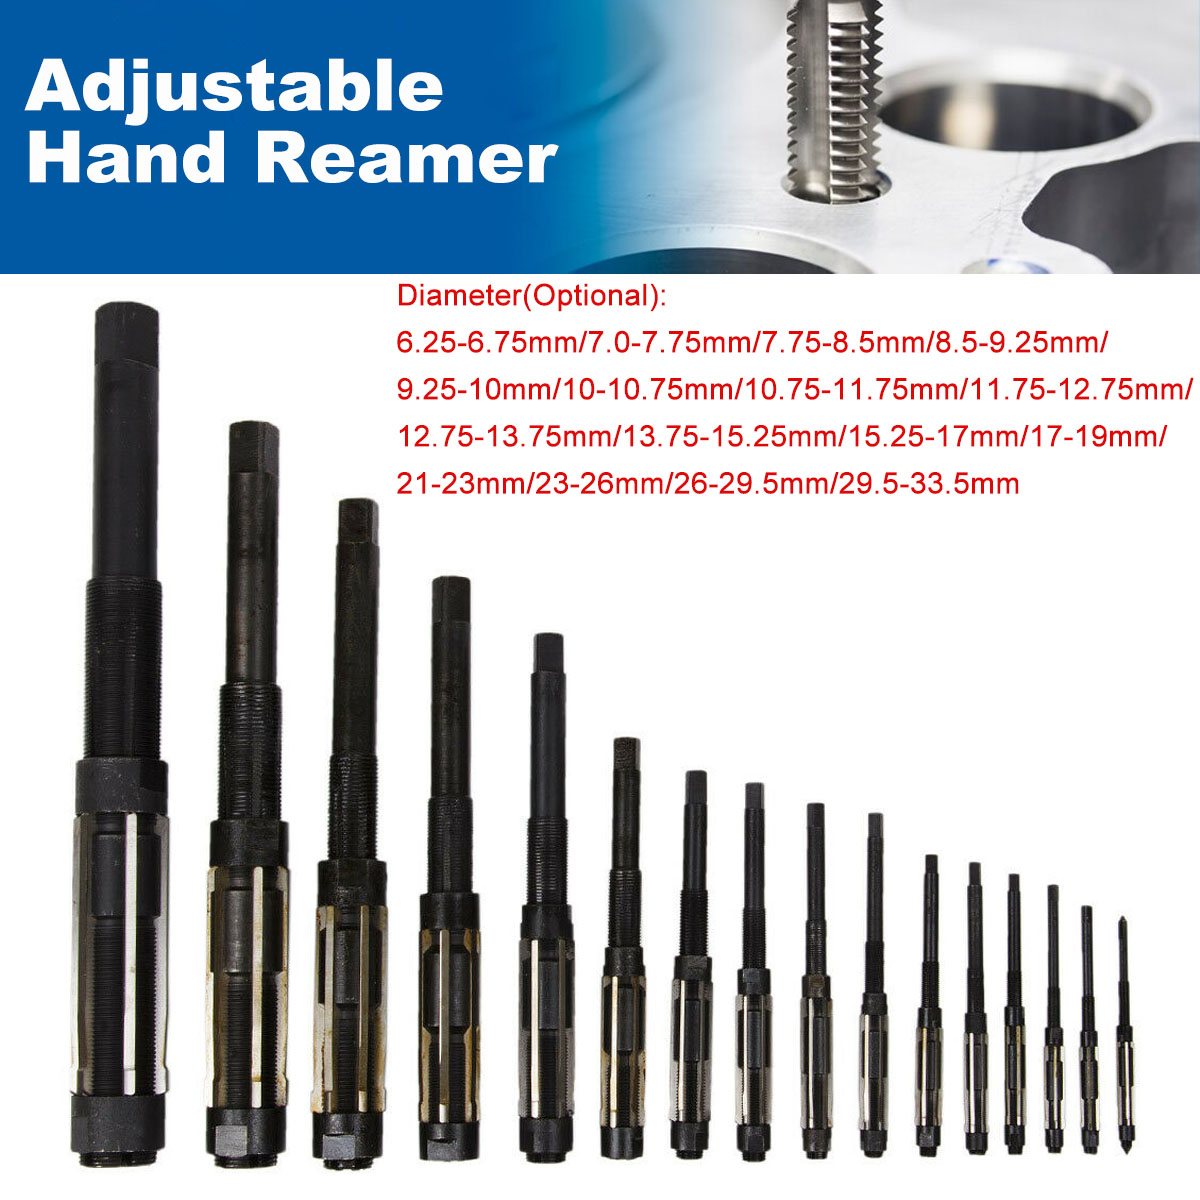 7 Pcs Set Adjustable Hand Reamer 7 Pieces Size HV To H3 1/4" Inch 15/32" Inch 